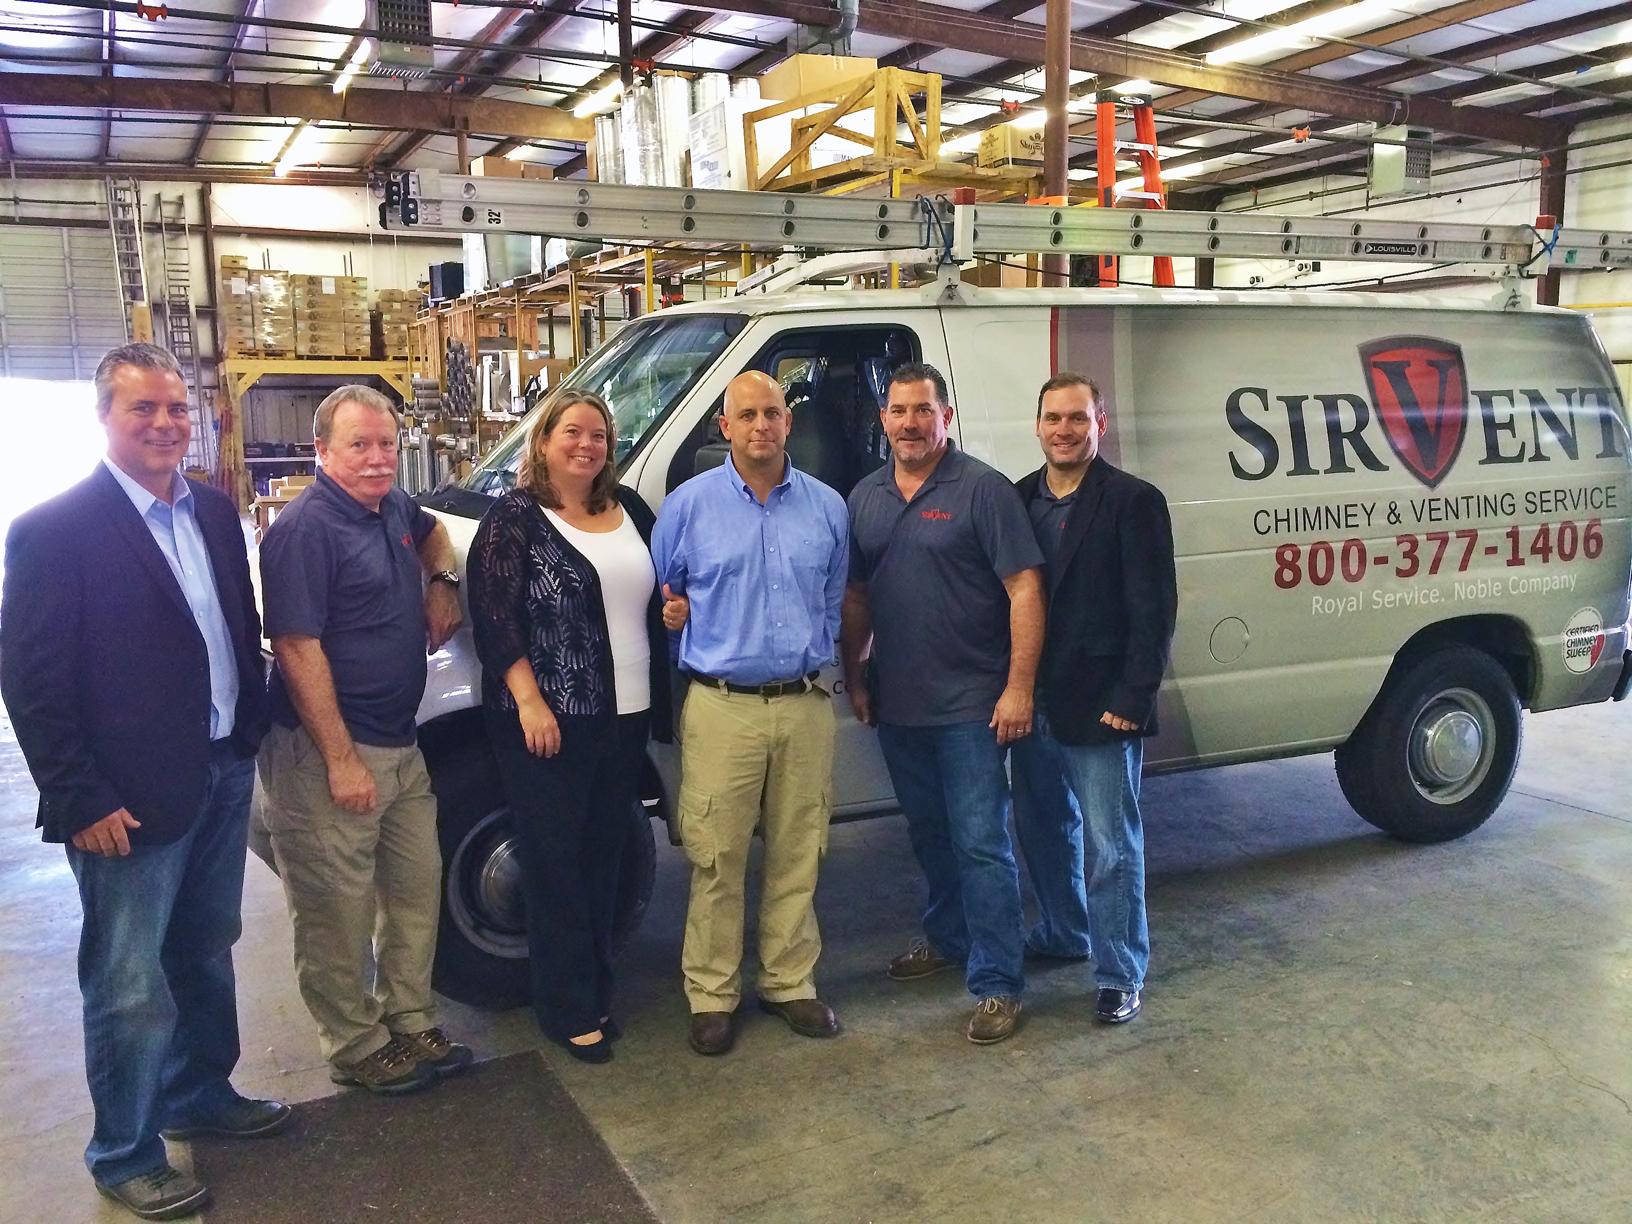 Chris and Kari Stacy launch SirVent Chimney & Venting Service of Charlotte